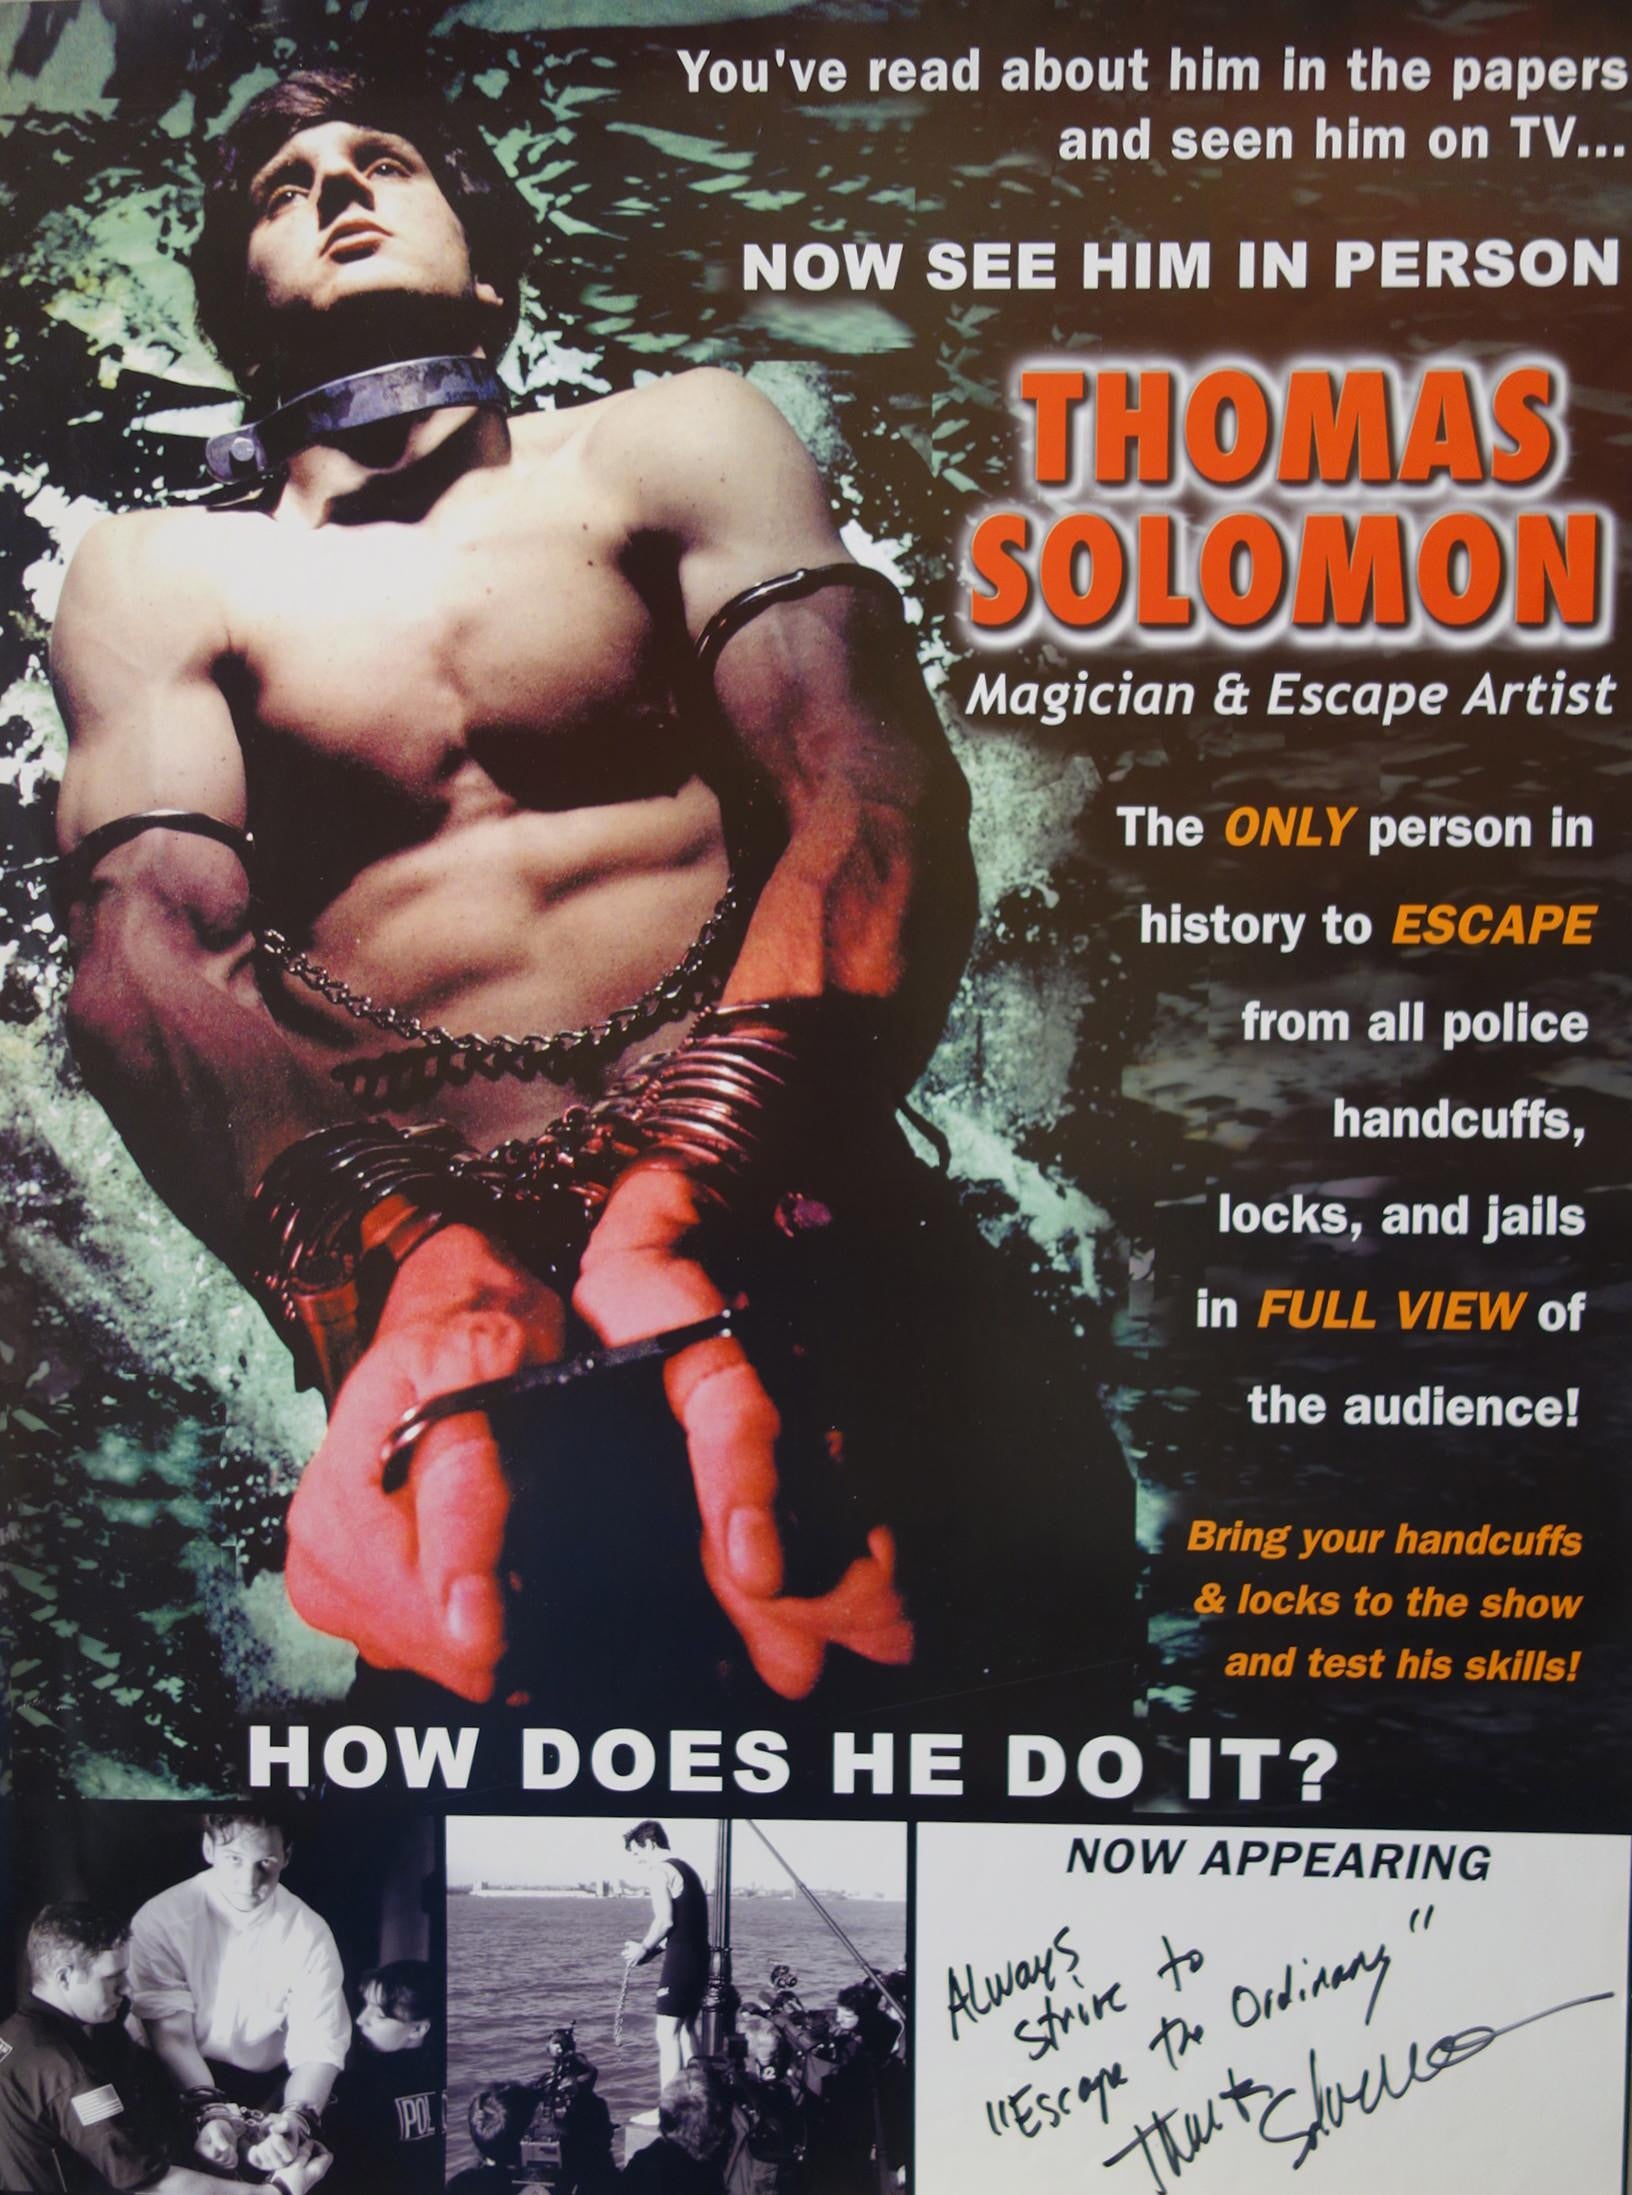 See him in person - THOMAS SOLOMAN